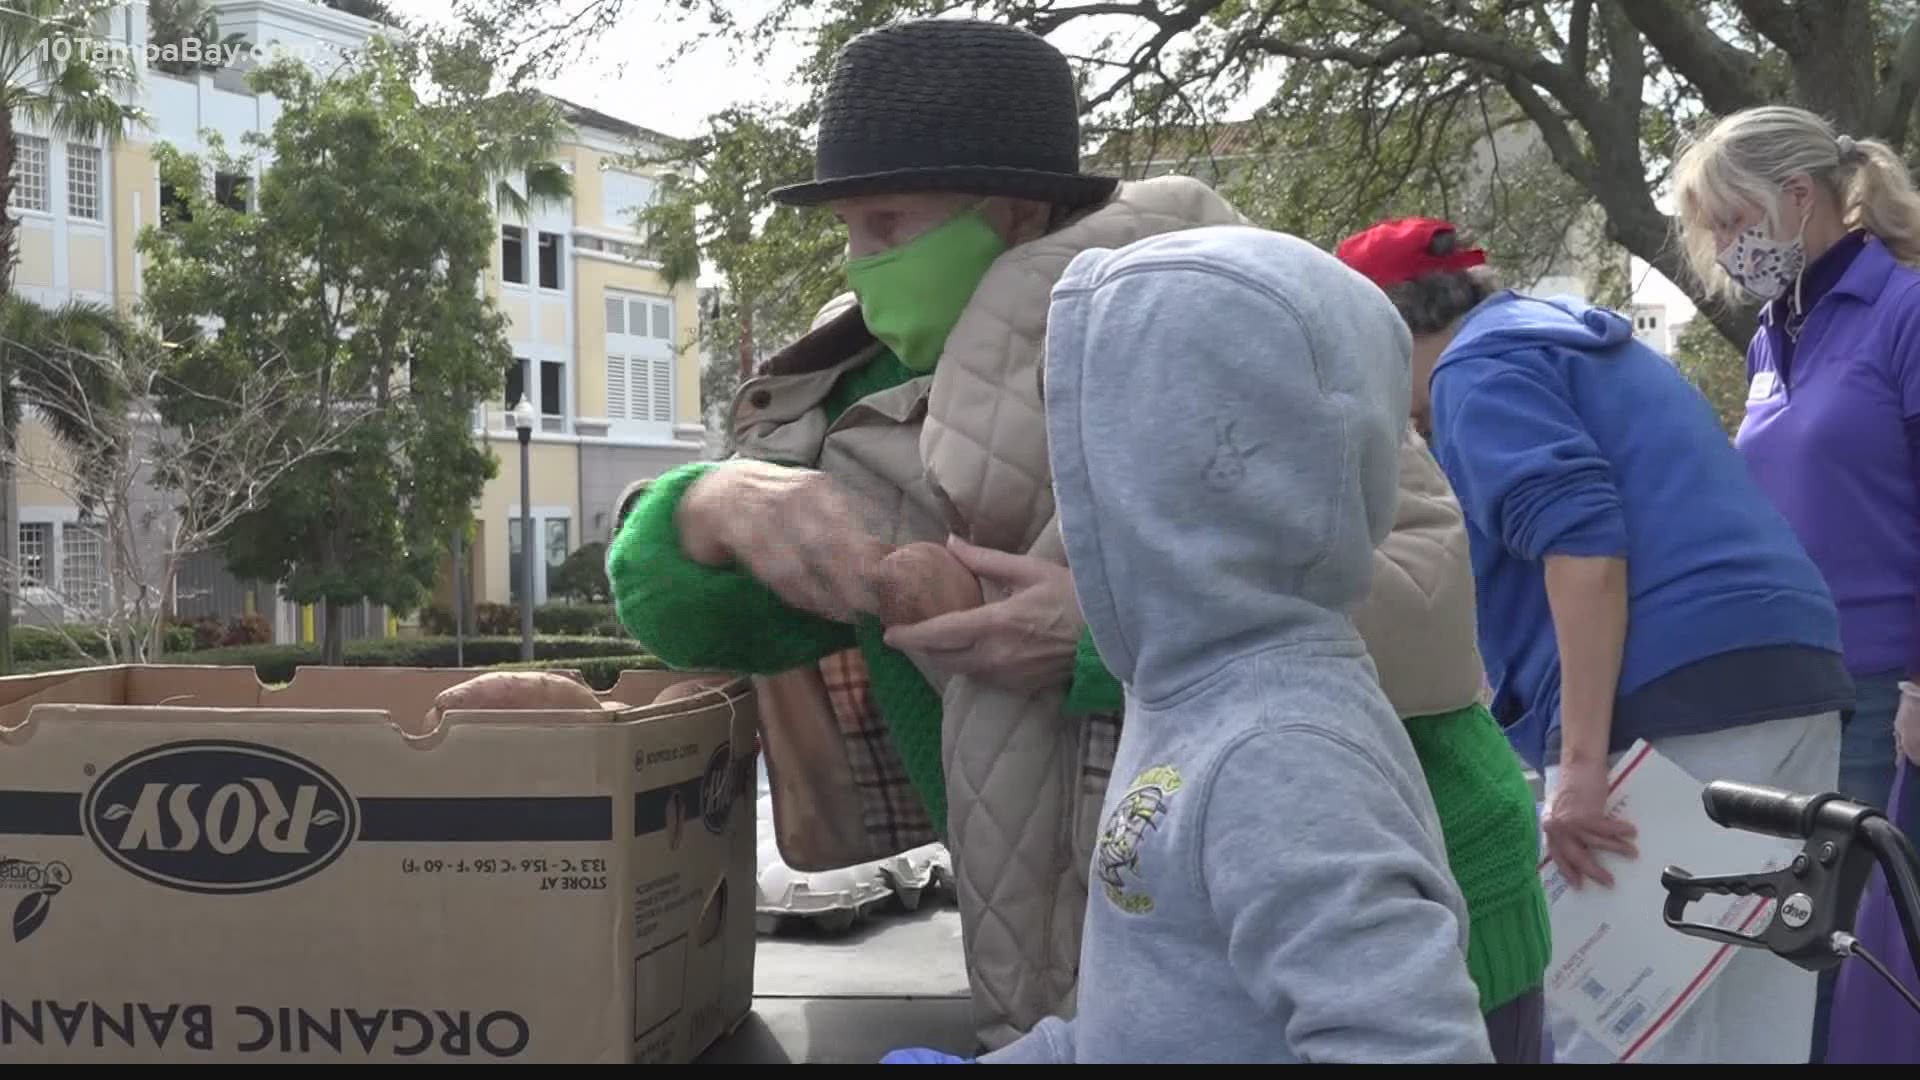 The COVID-19 pandemic gave Kelli Casto an idea. The seniors her non-profit served needed fresh food so she started mobile food pantries to serve thousands.